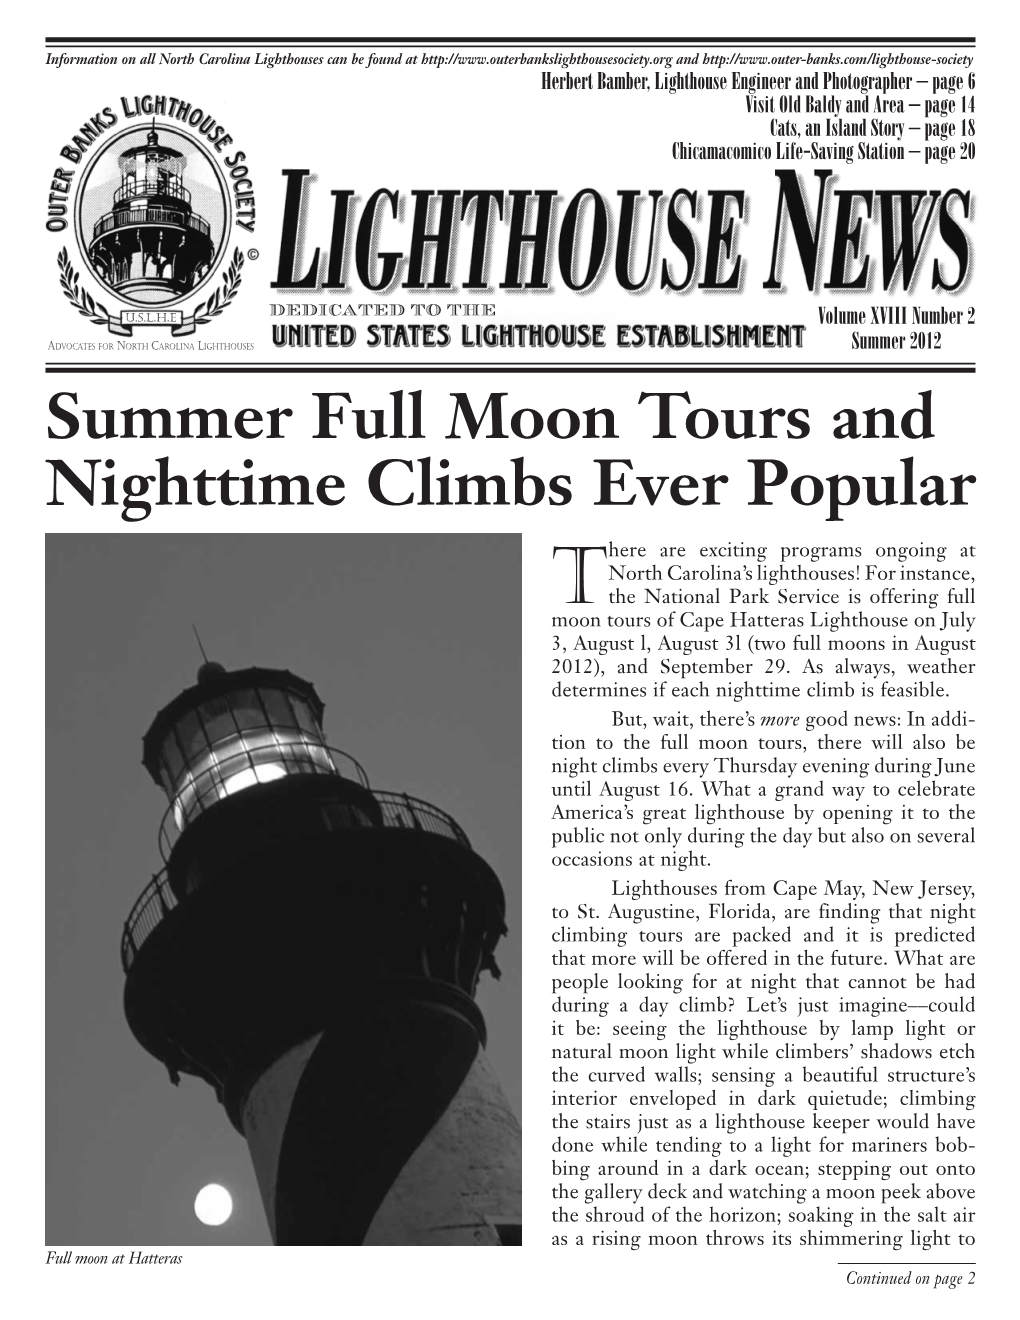 Summer Full Moon Tours and Nighttime Climbs Ever Popular